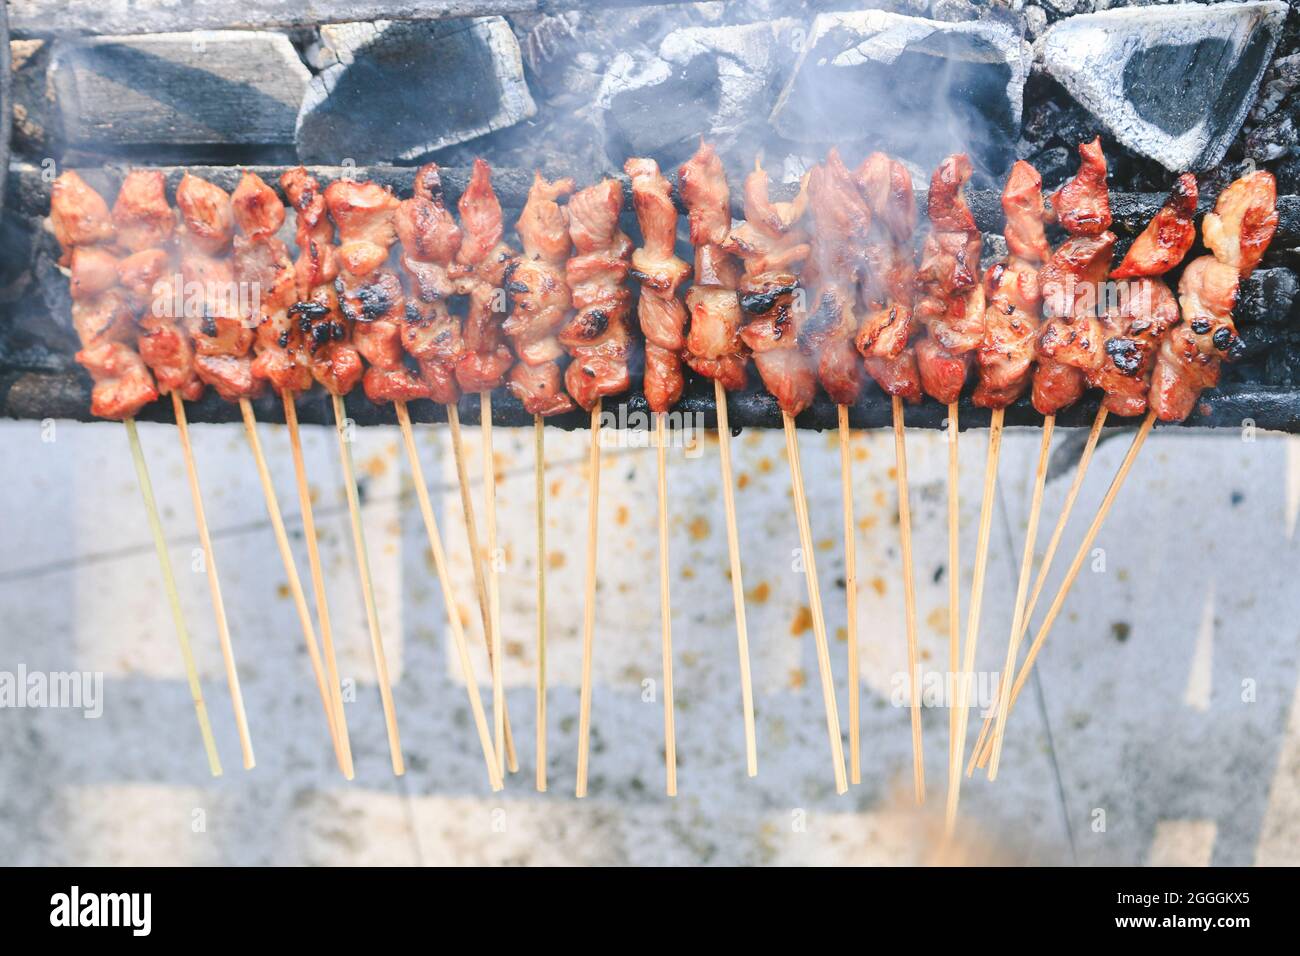 Top view of Sate Kambing or goat satay on red fire grilling by people. Stock Photo